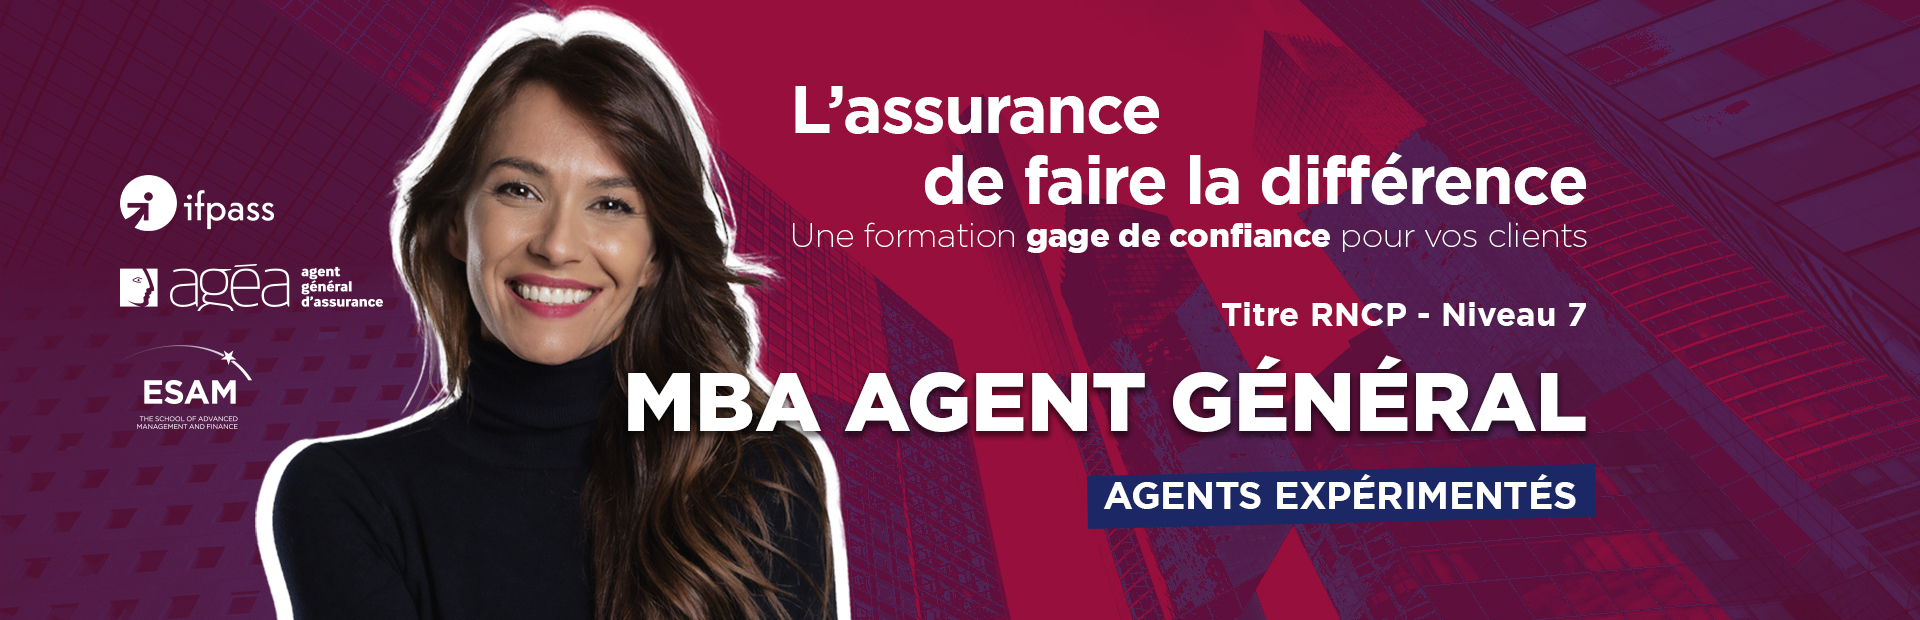 mba agent xp relance